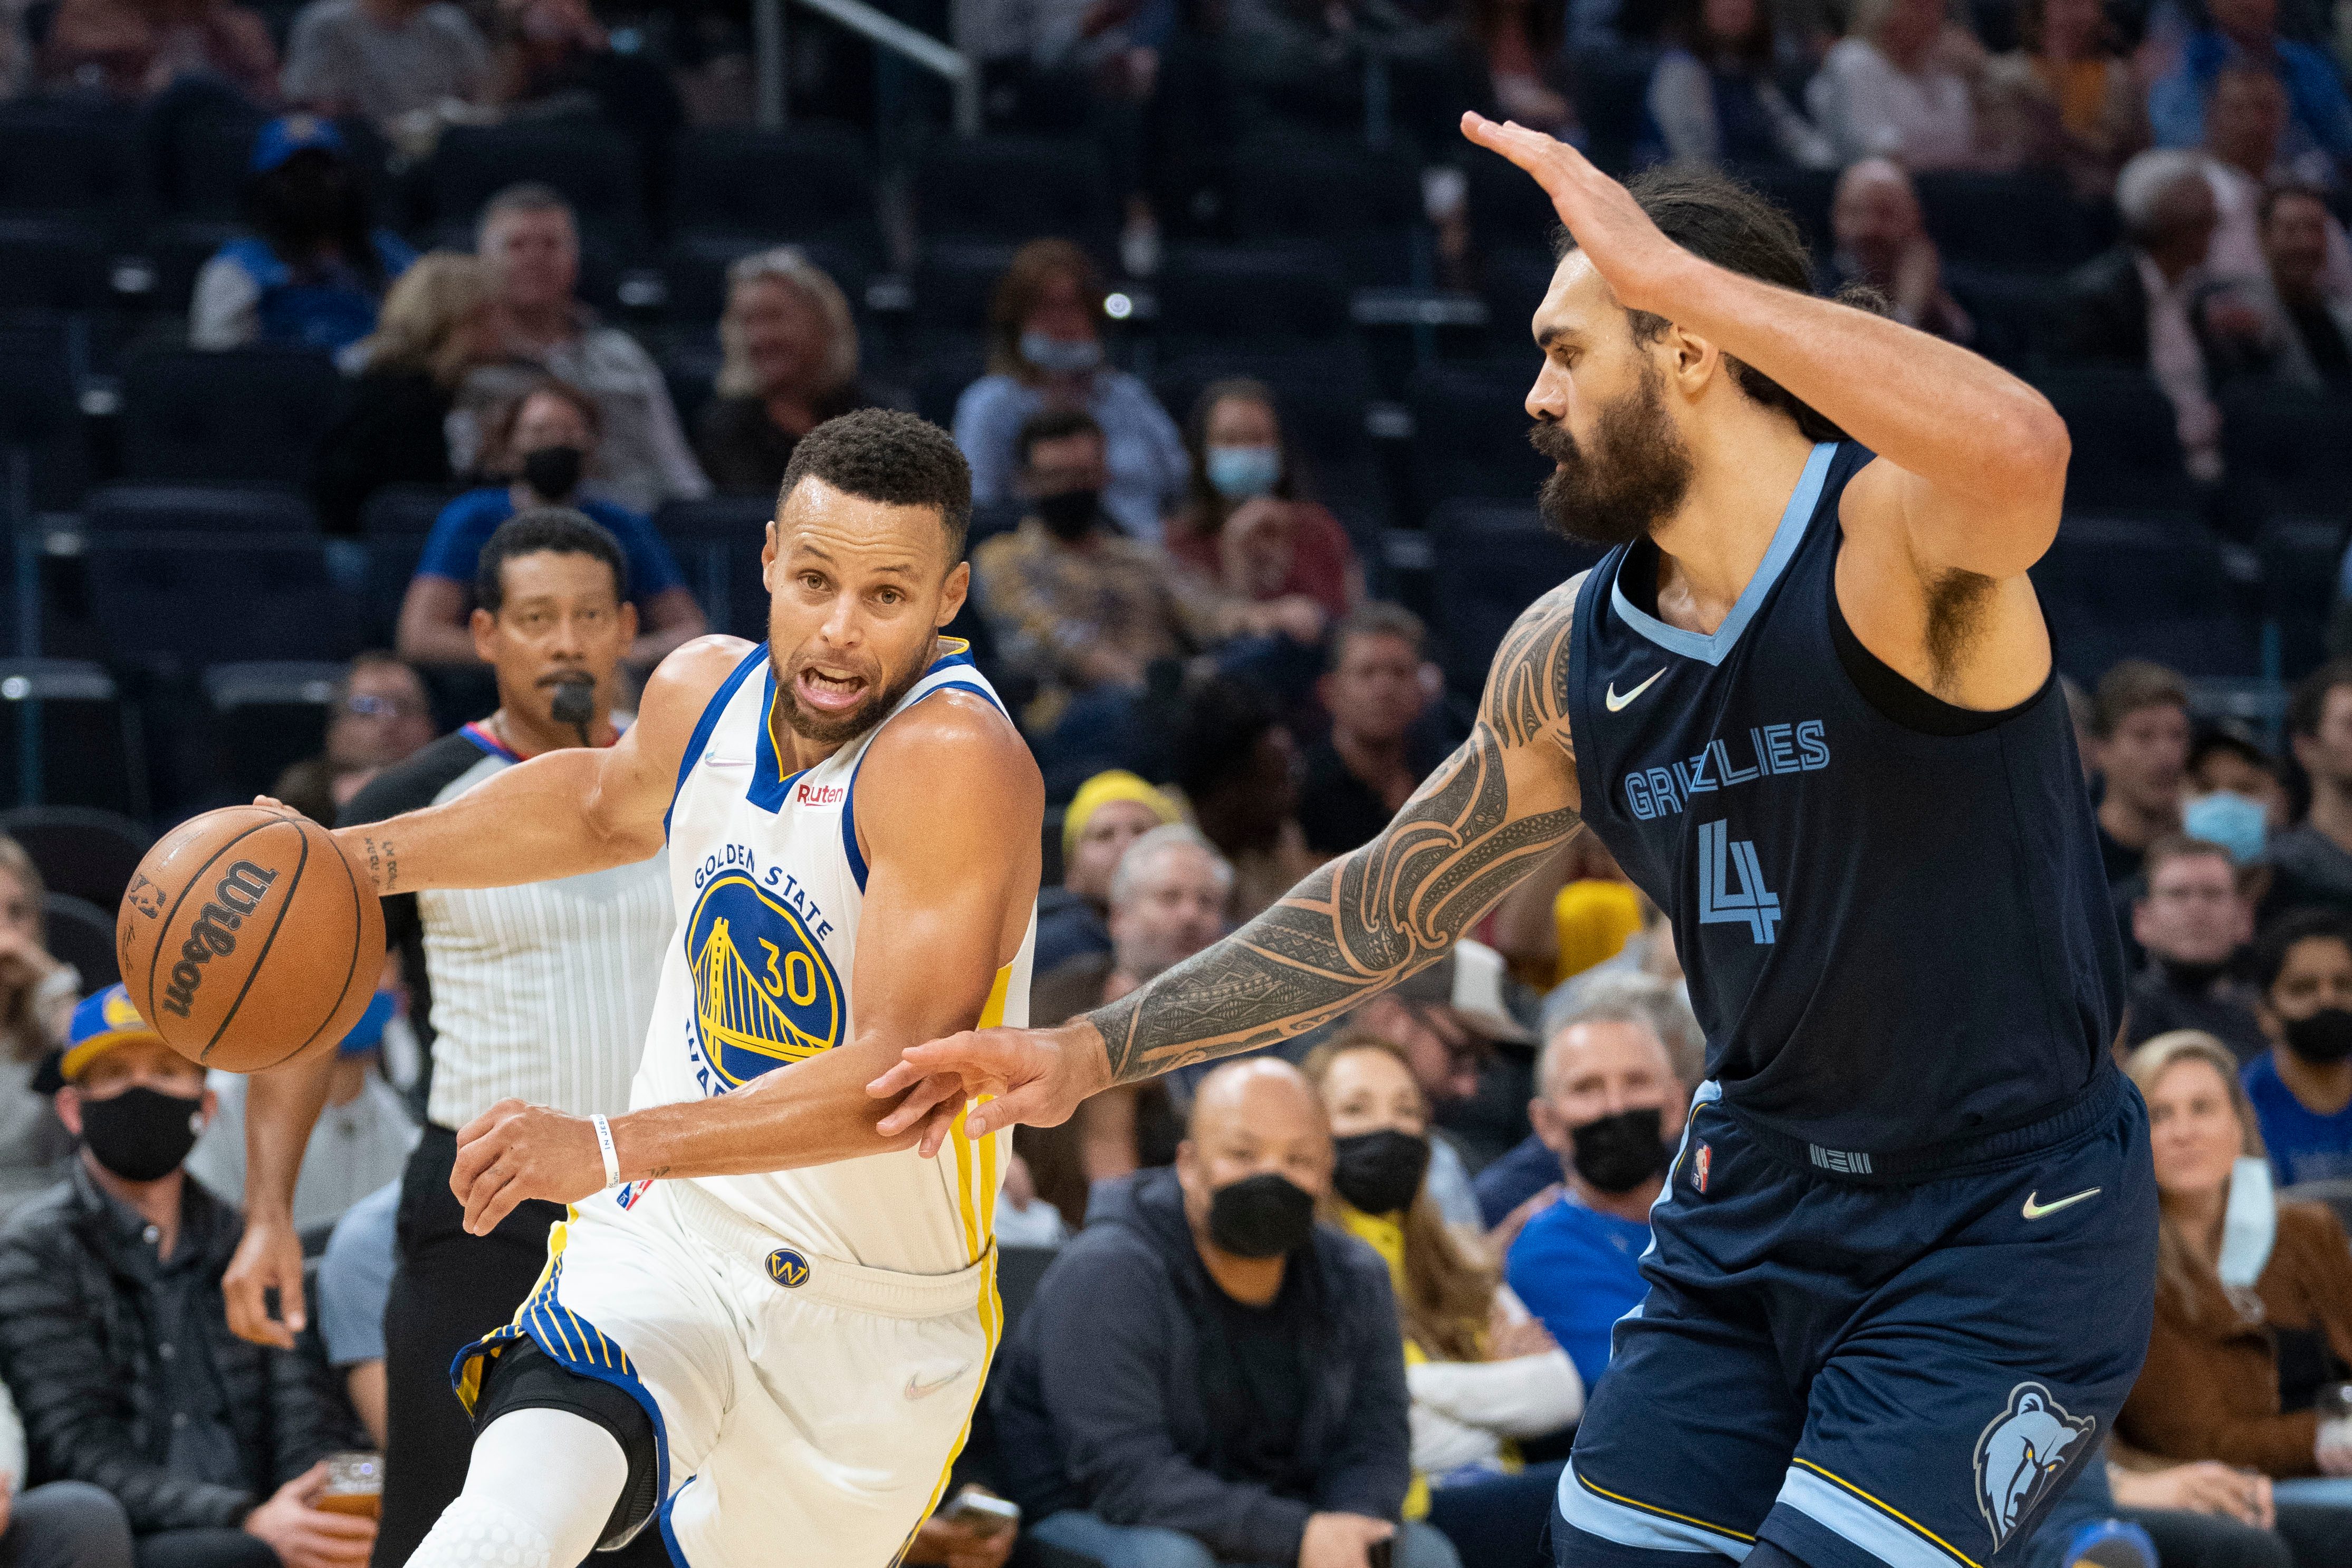 Grizzlies take down Warriors again in overtime in play-in rematch